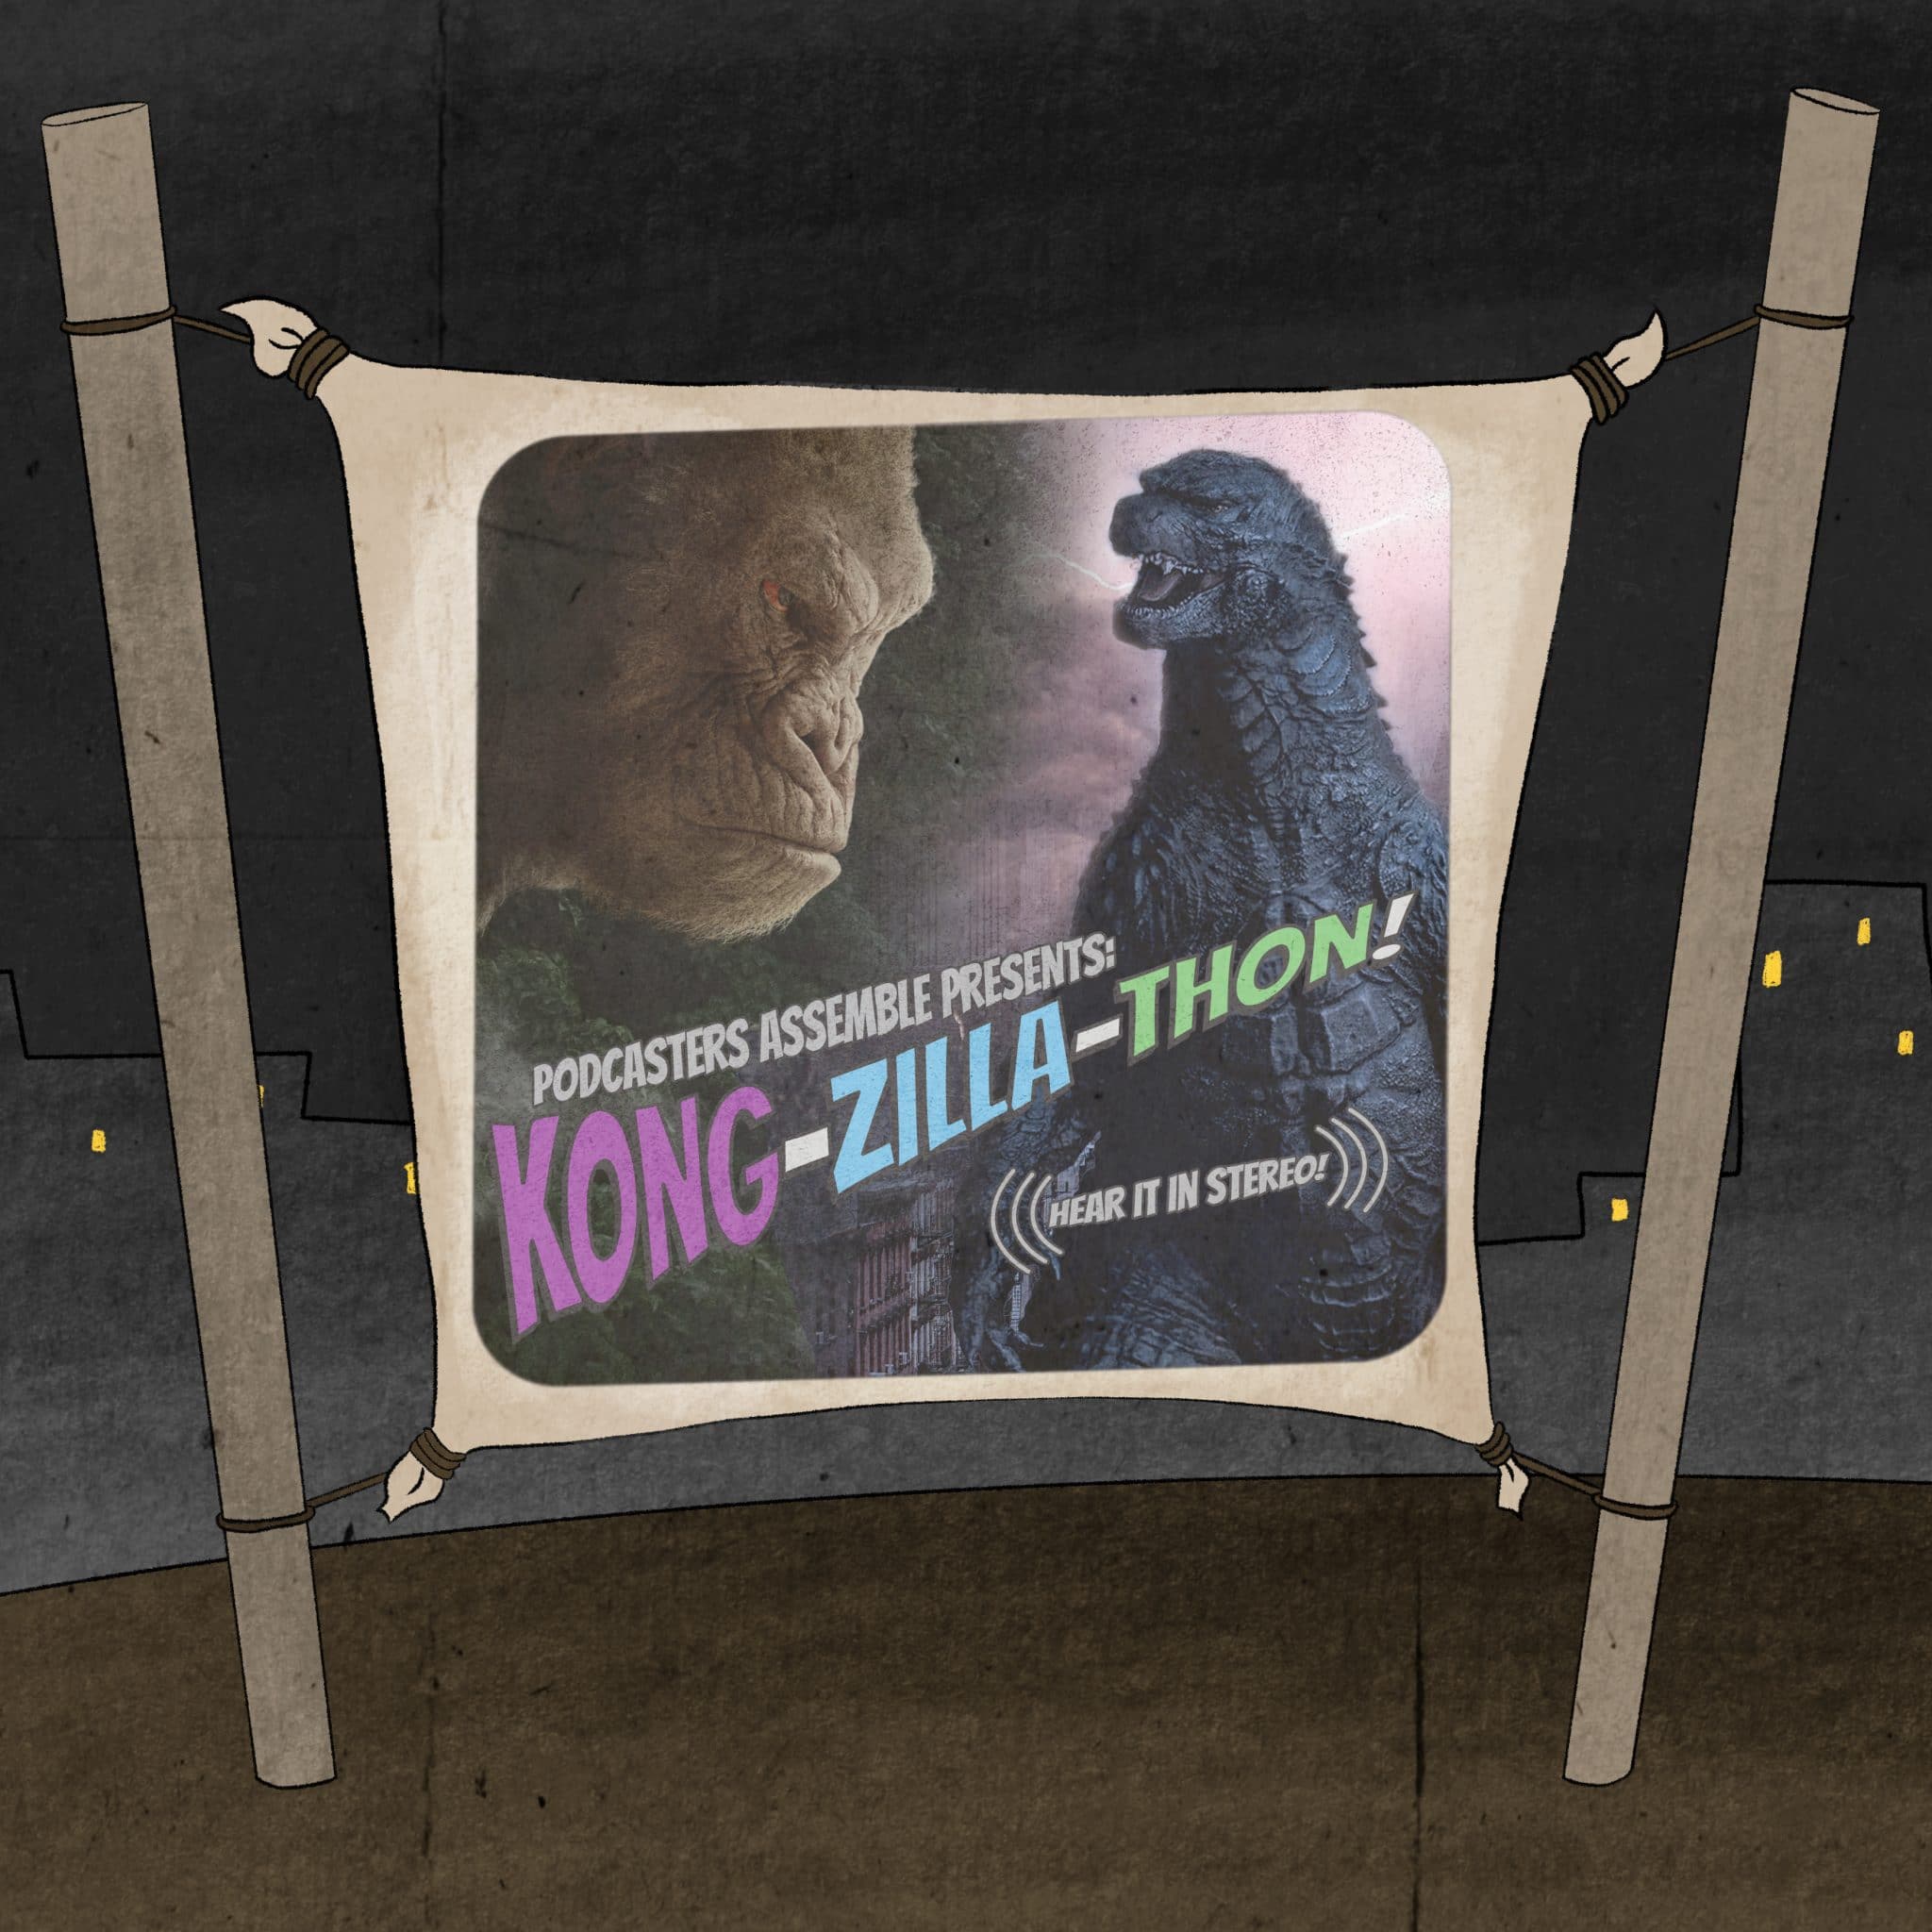 Podcasters Assemble Presents: "KONG-ZILLA-THON!" (Trailer)